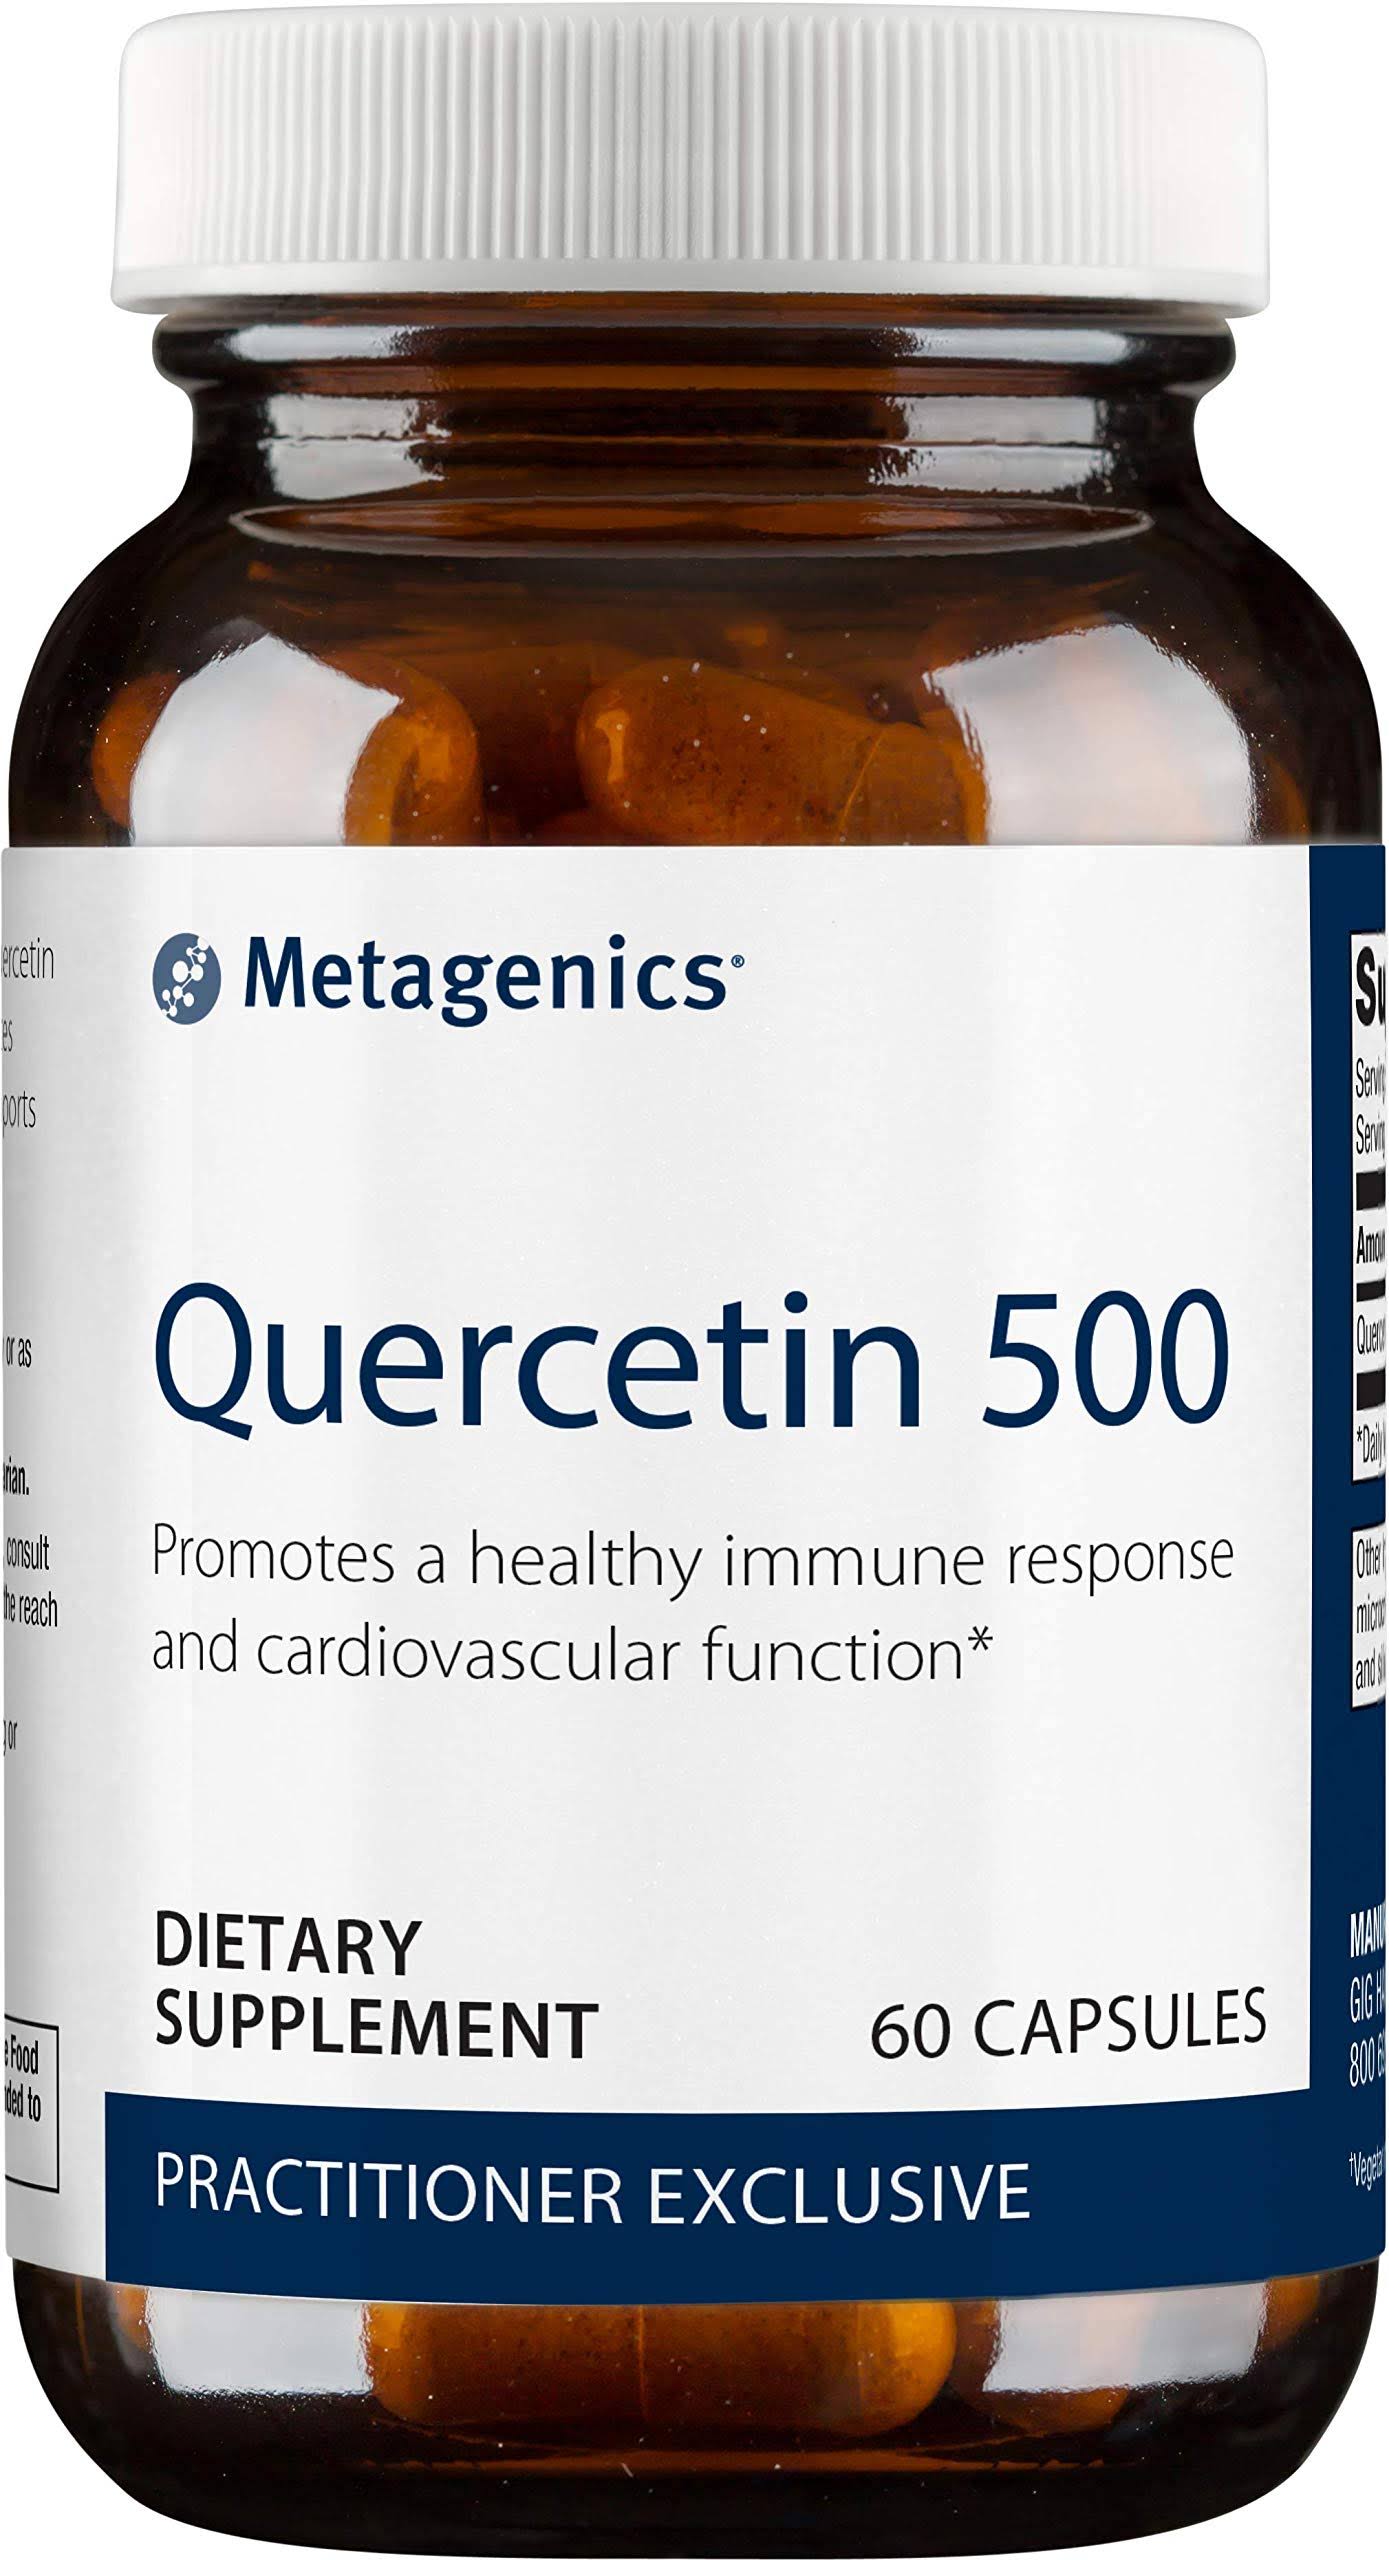 Metagenics Quercetin 500 Promotes a Healthy Immune Response and Cardiovascular Function* 60 Servings